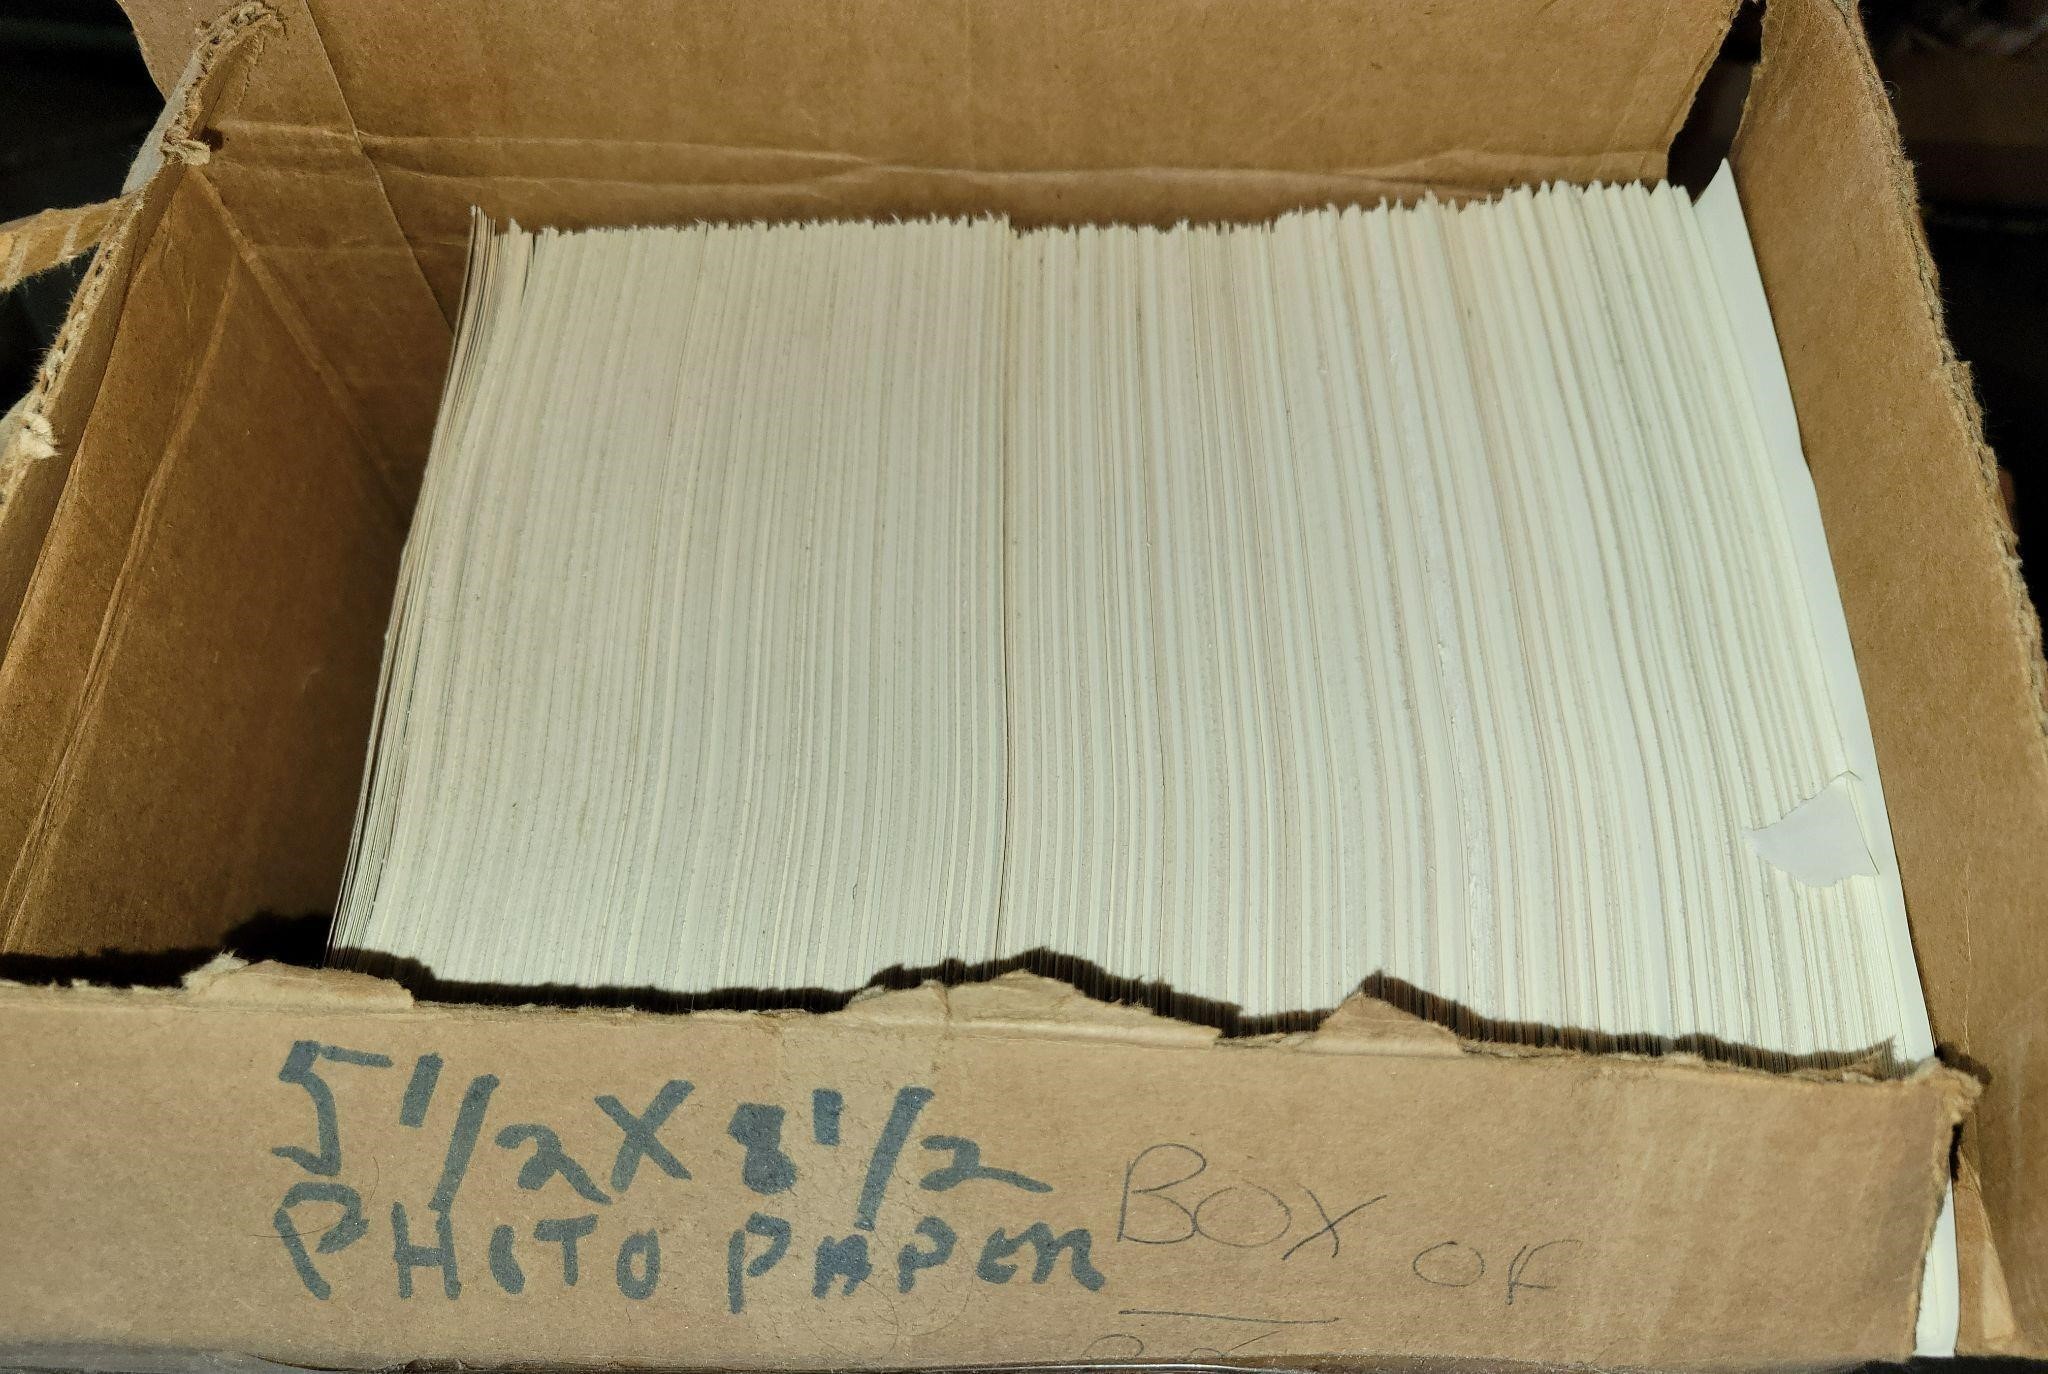 Box of 5 1/2" x 8 1/2" Photo Papers